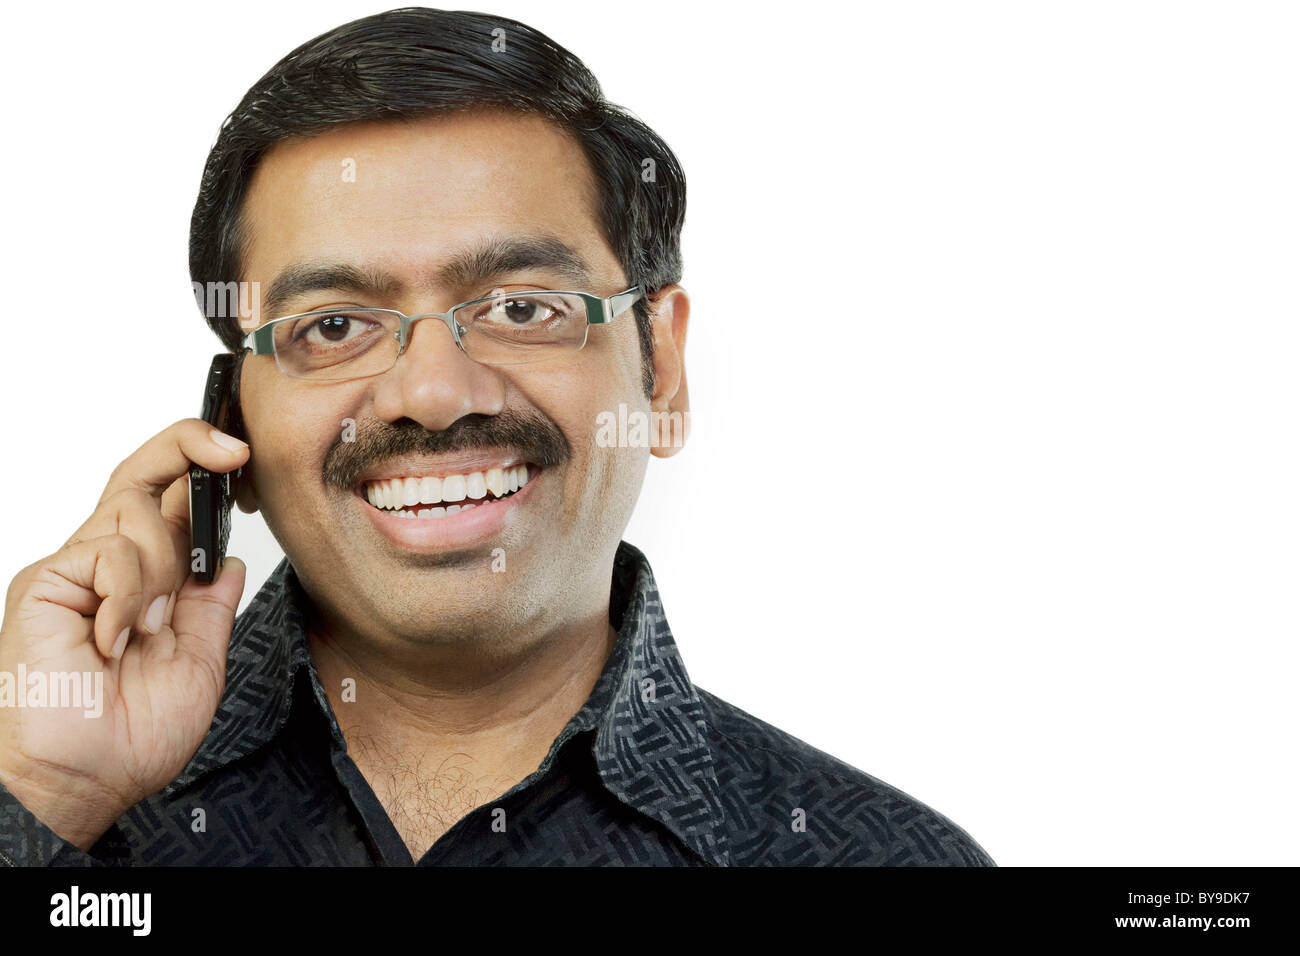 Man talking on a mobile phone Stock Photo